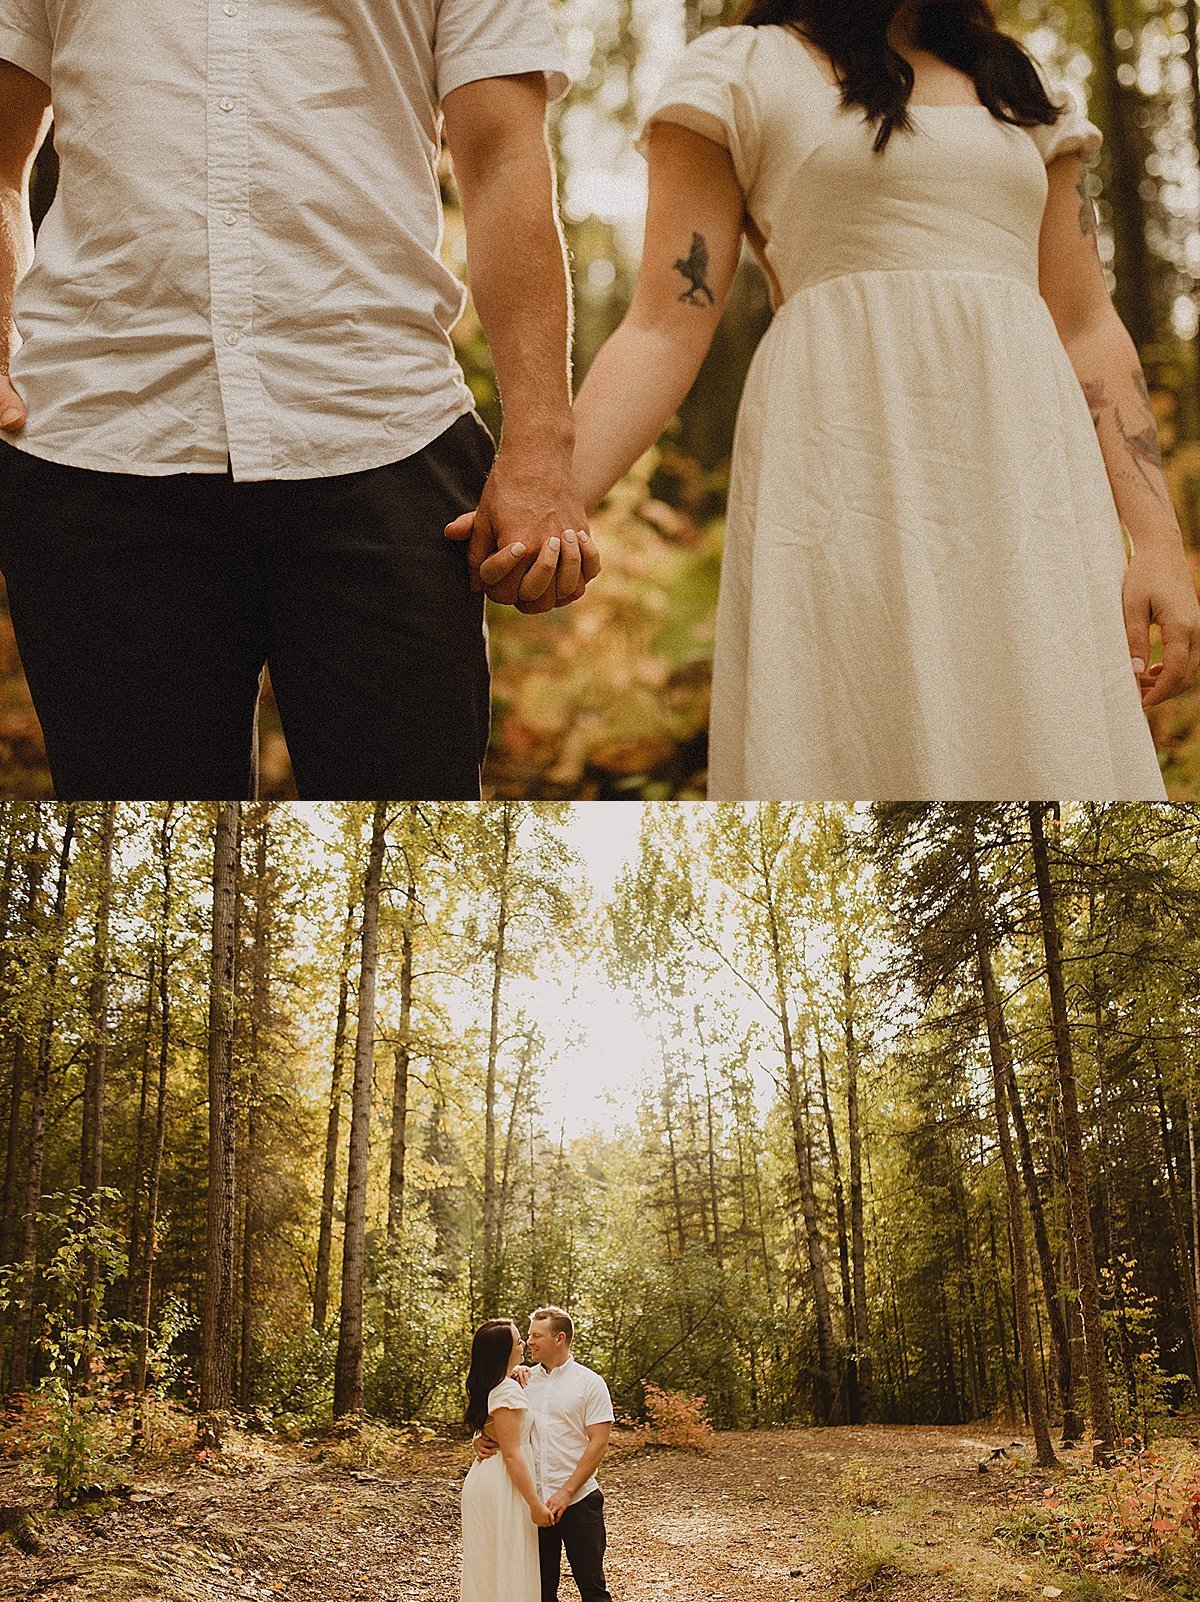  Man and woman with tattoo hold hands in forest engagement outdoor shoot 